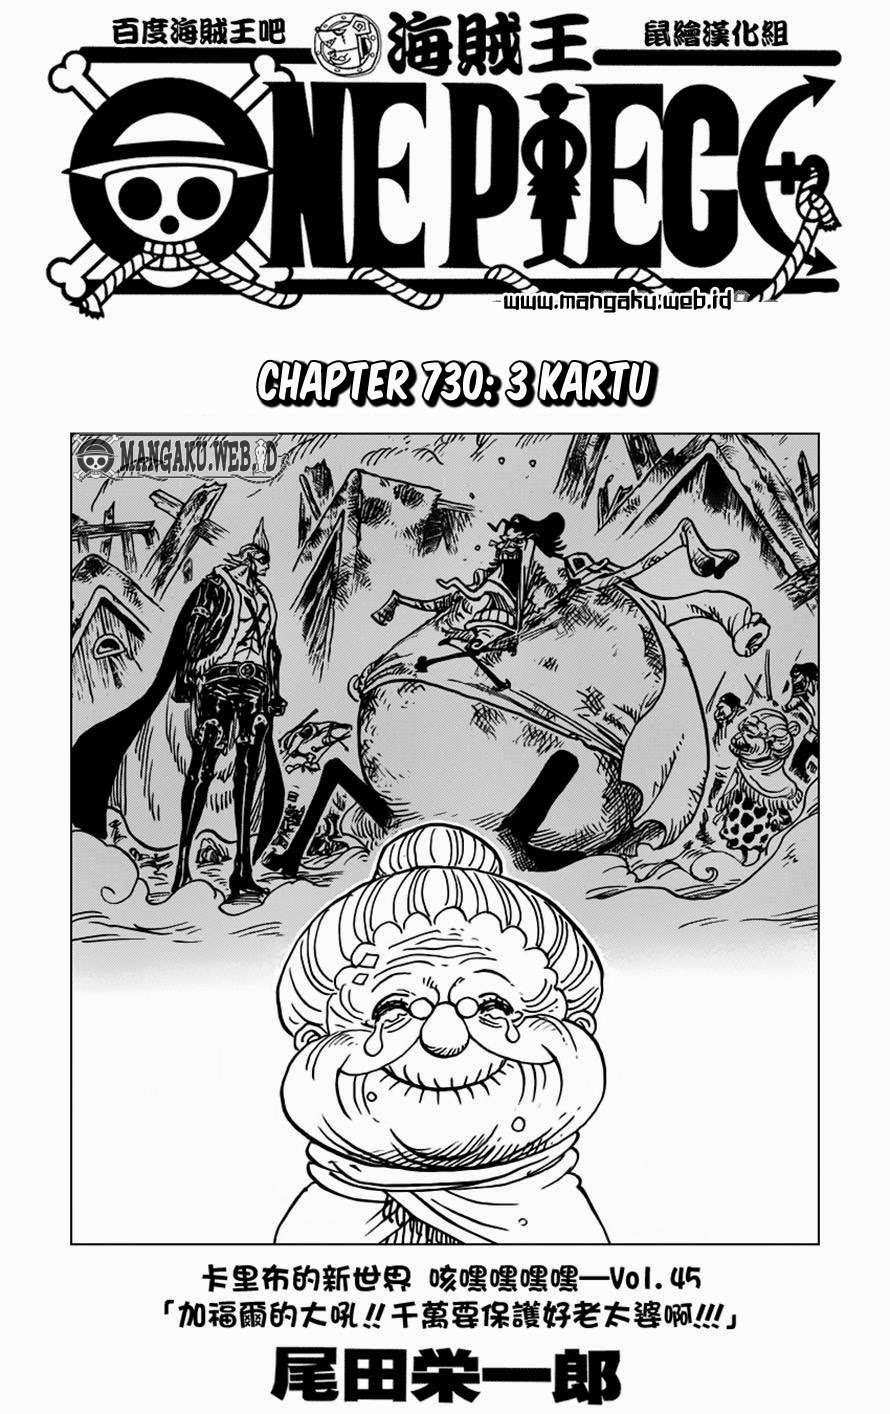 One Piece Chapter 730 3